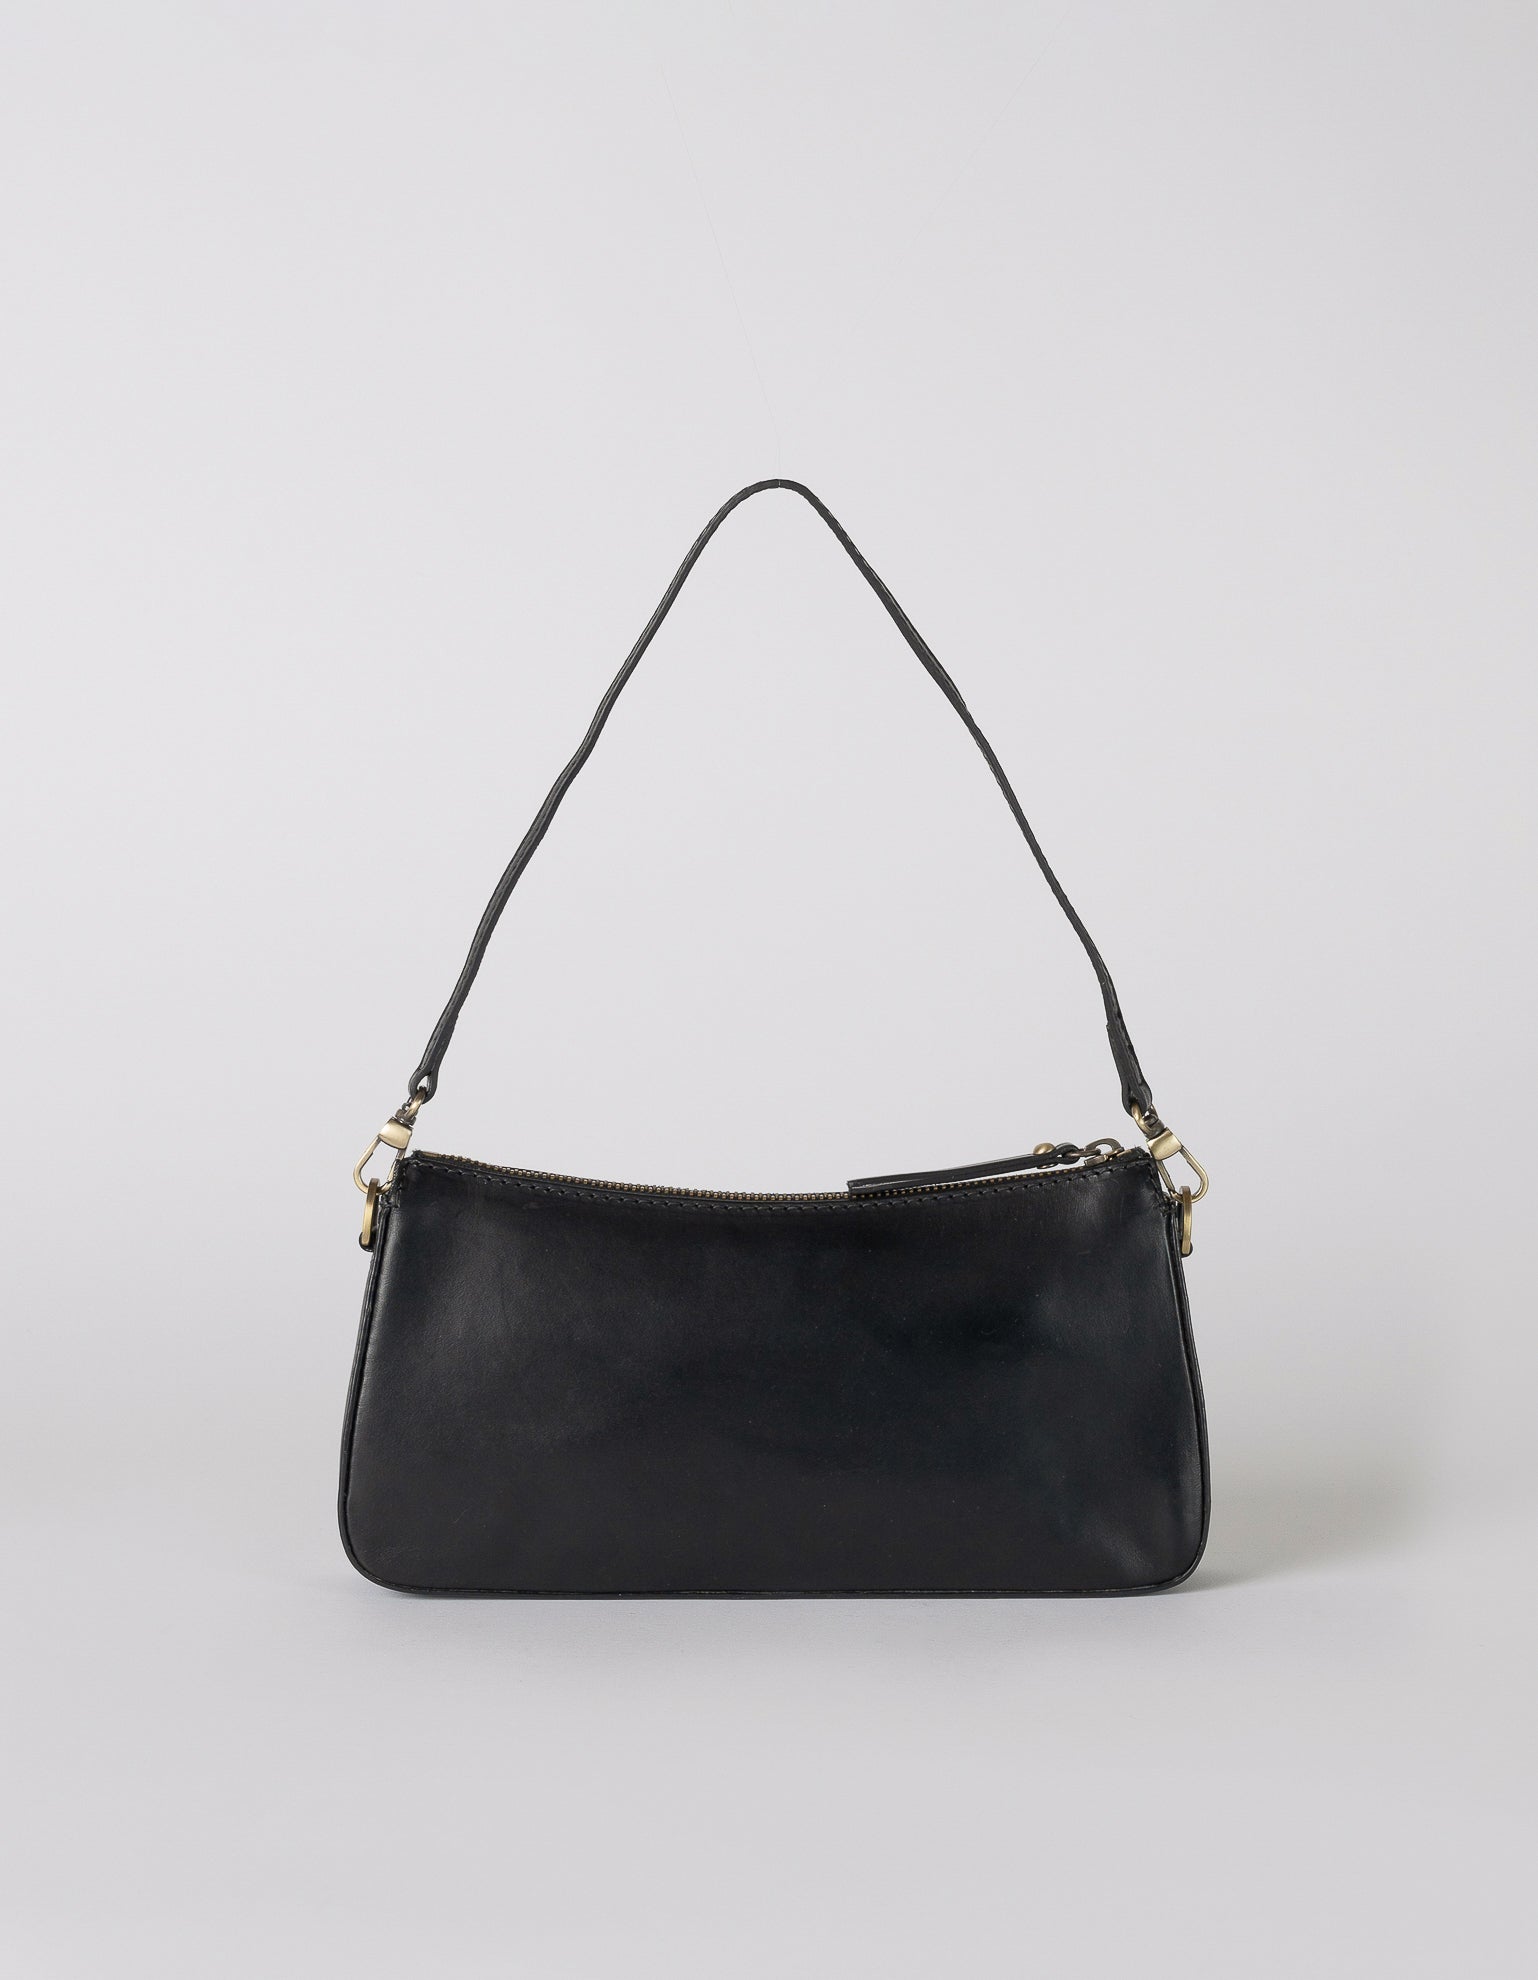 Taylor baguette bag in black classic leather - back product image